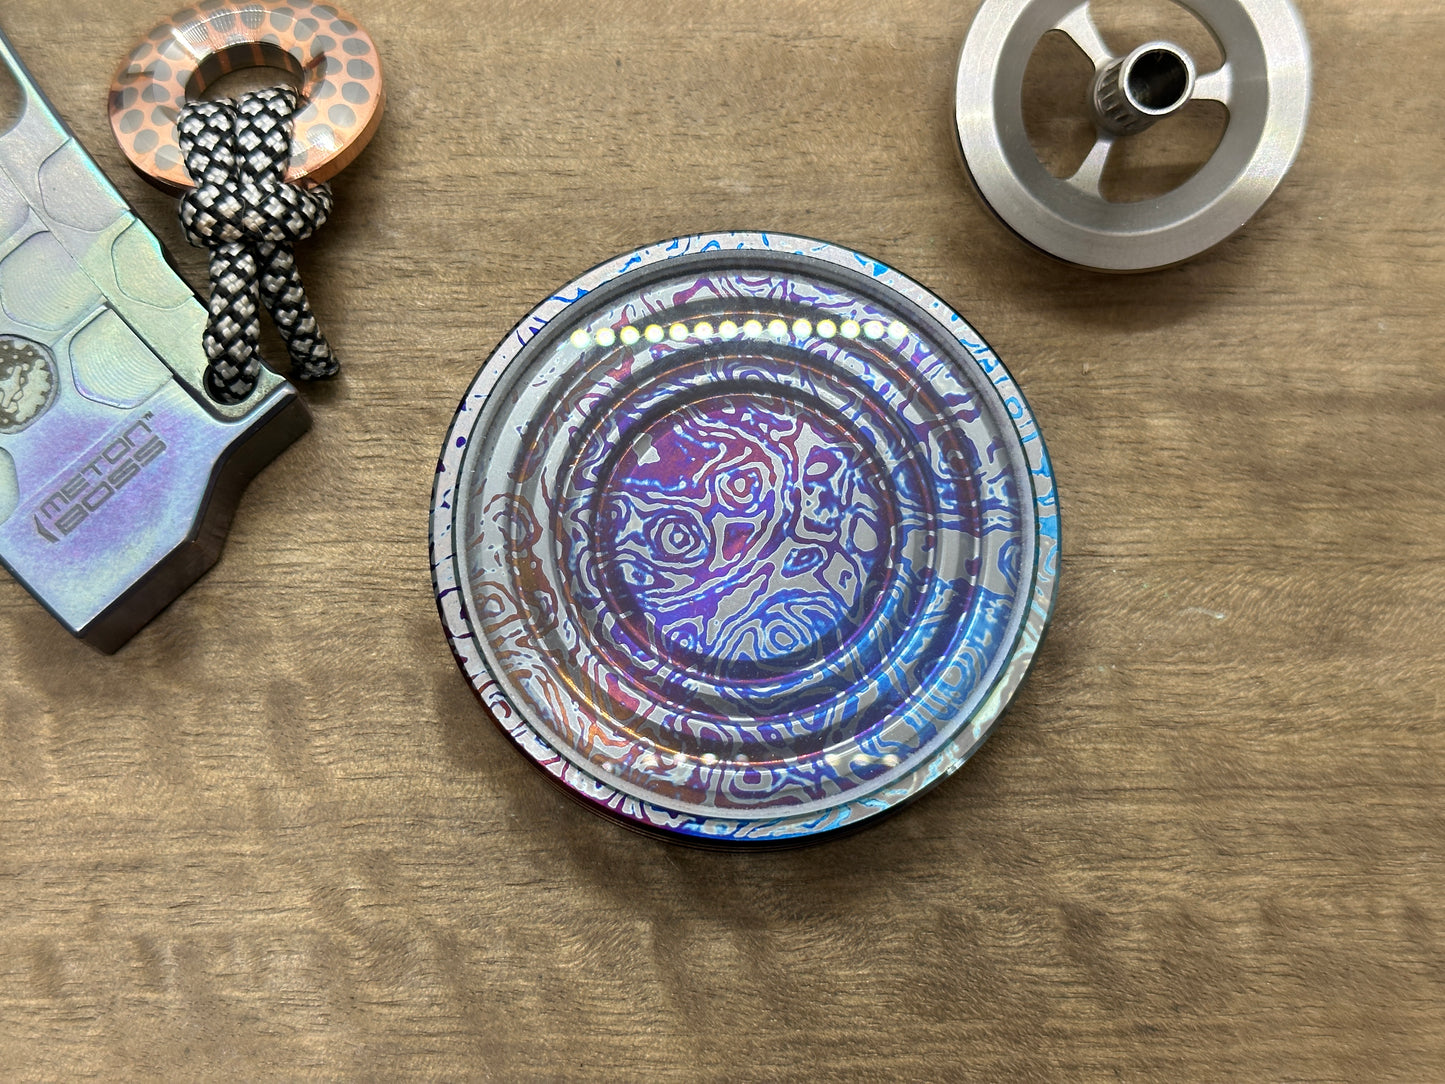 Flamed ALIEN Titanium Spin base for Spinning Tops & Coins